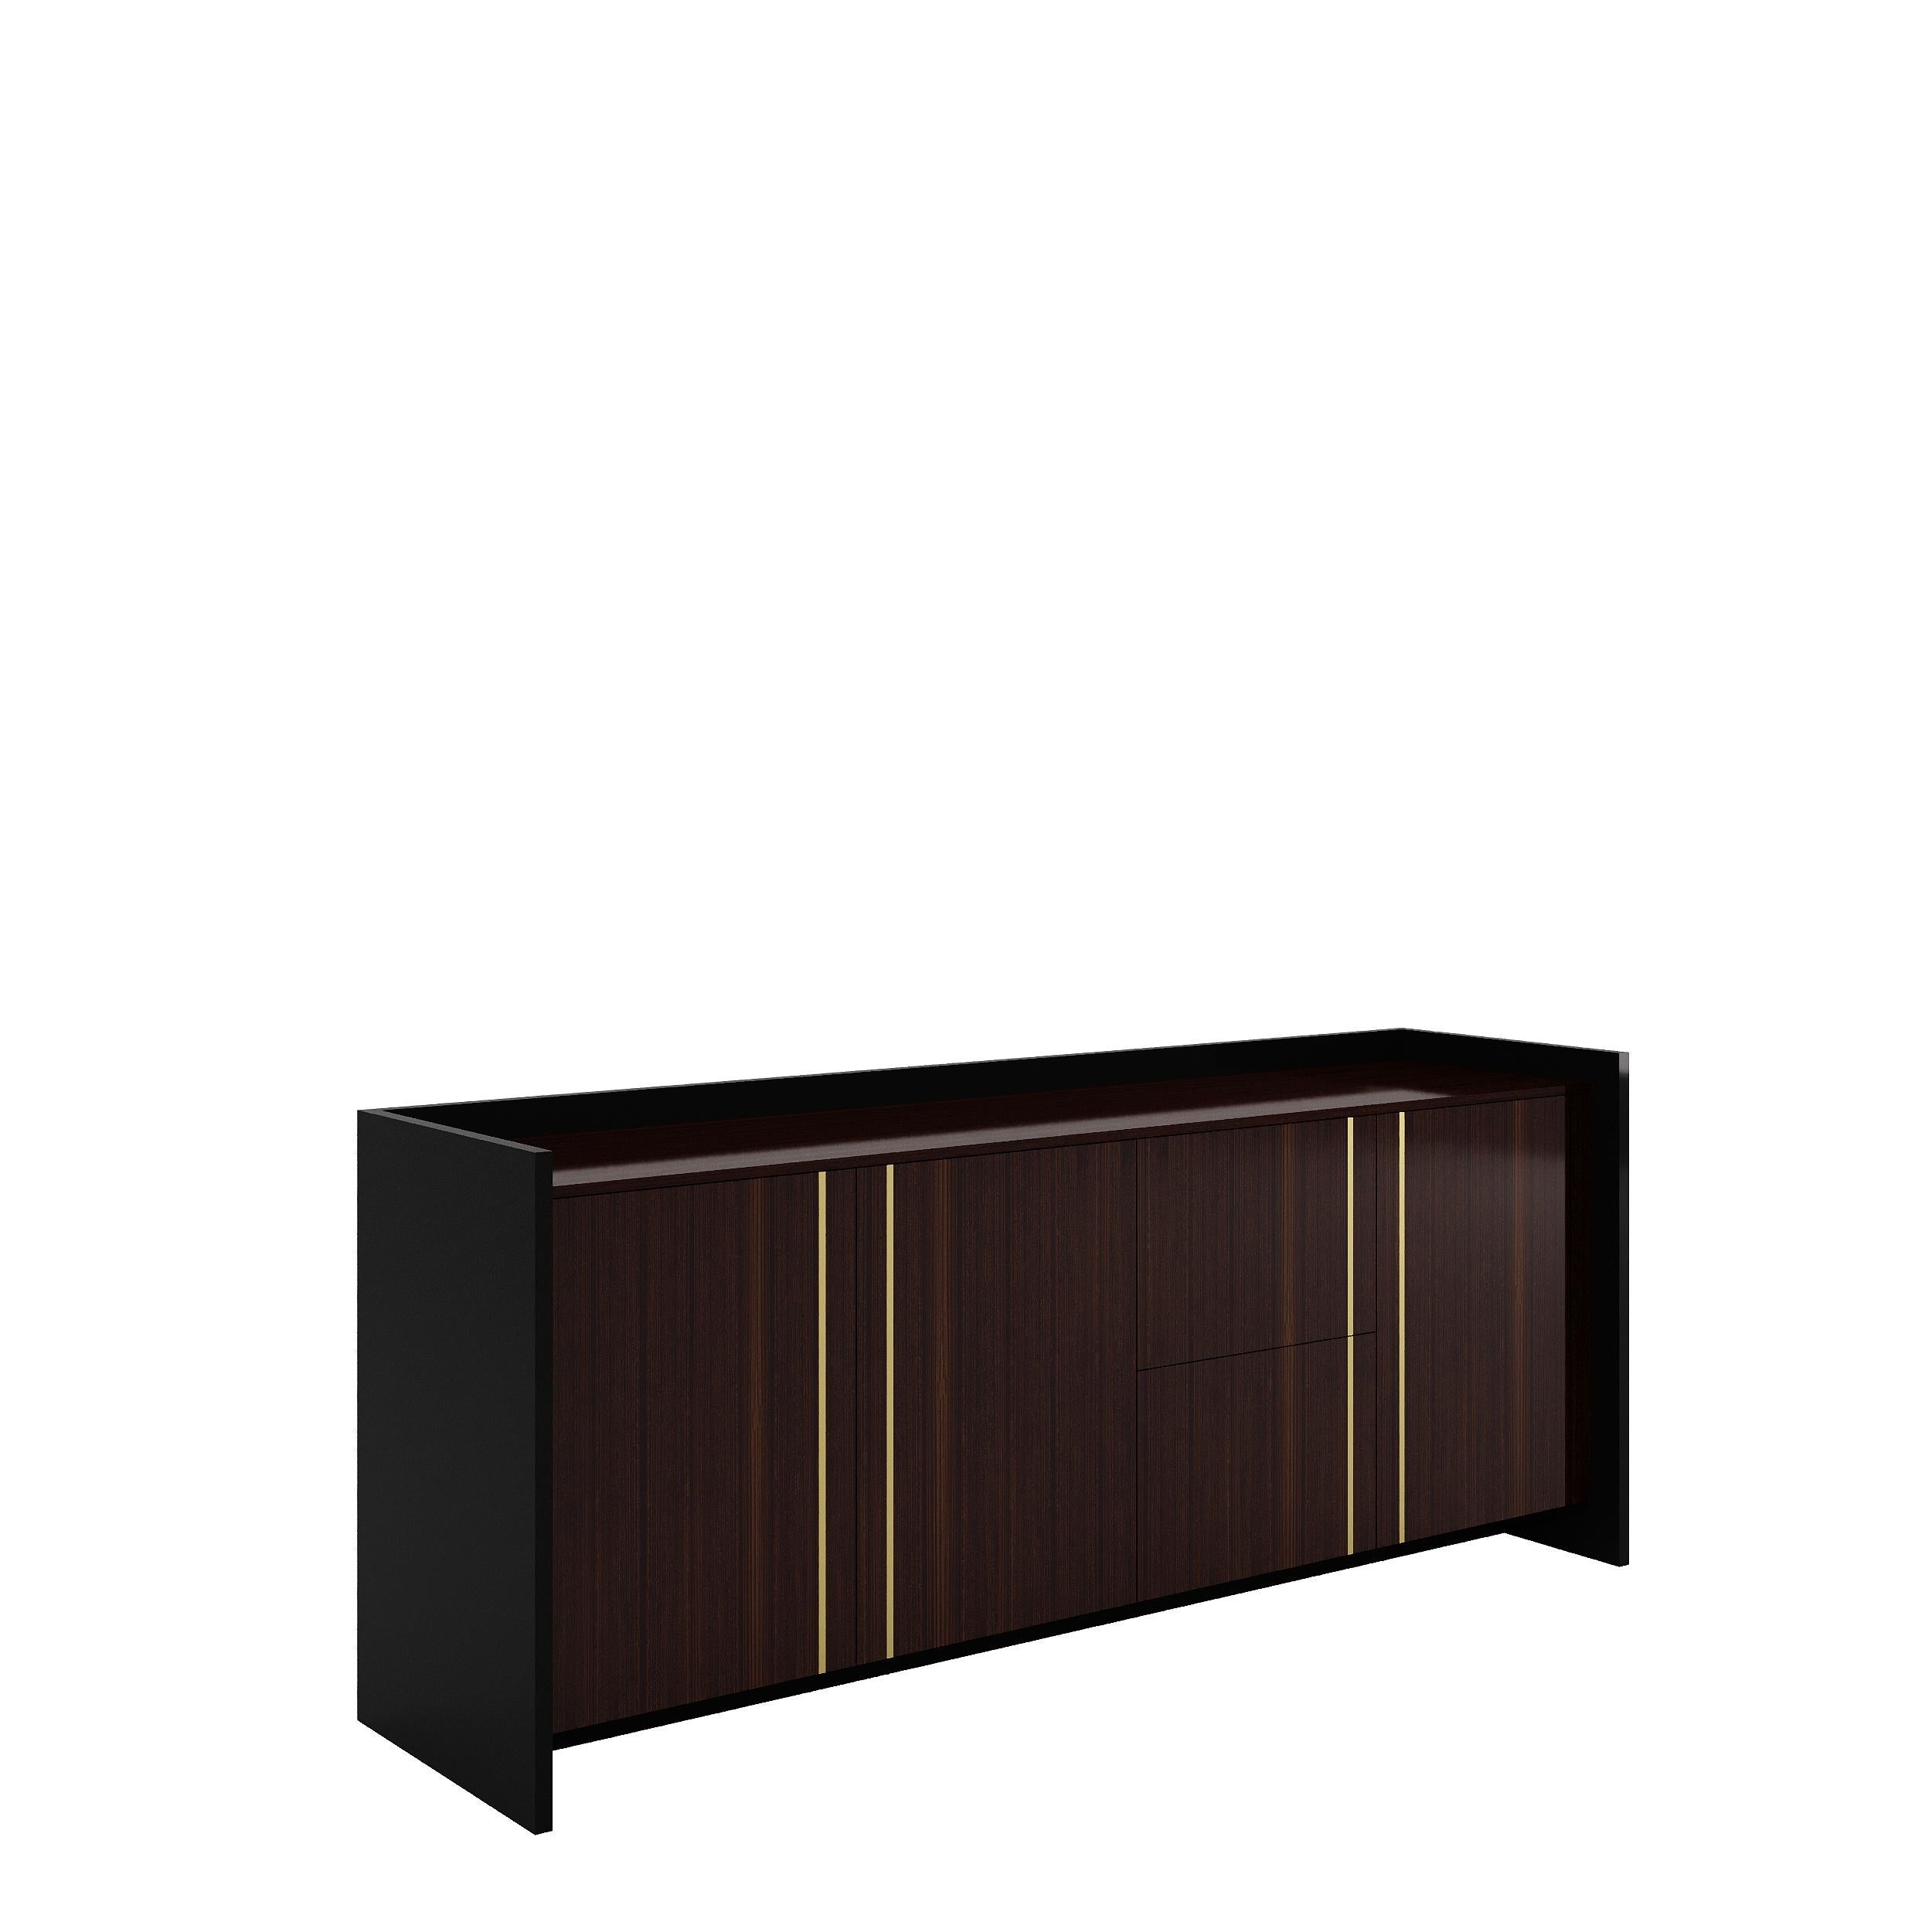 PLAZA is a beautiful wooden sideboard with inlaying doors and drawers, and stunning details lacquered in brass color.‎ Combining luxury design with brilliant craftsmanship, this is a timeless furniture creation.‎ Plaza includes cutlery drawer, lined